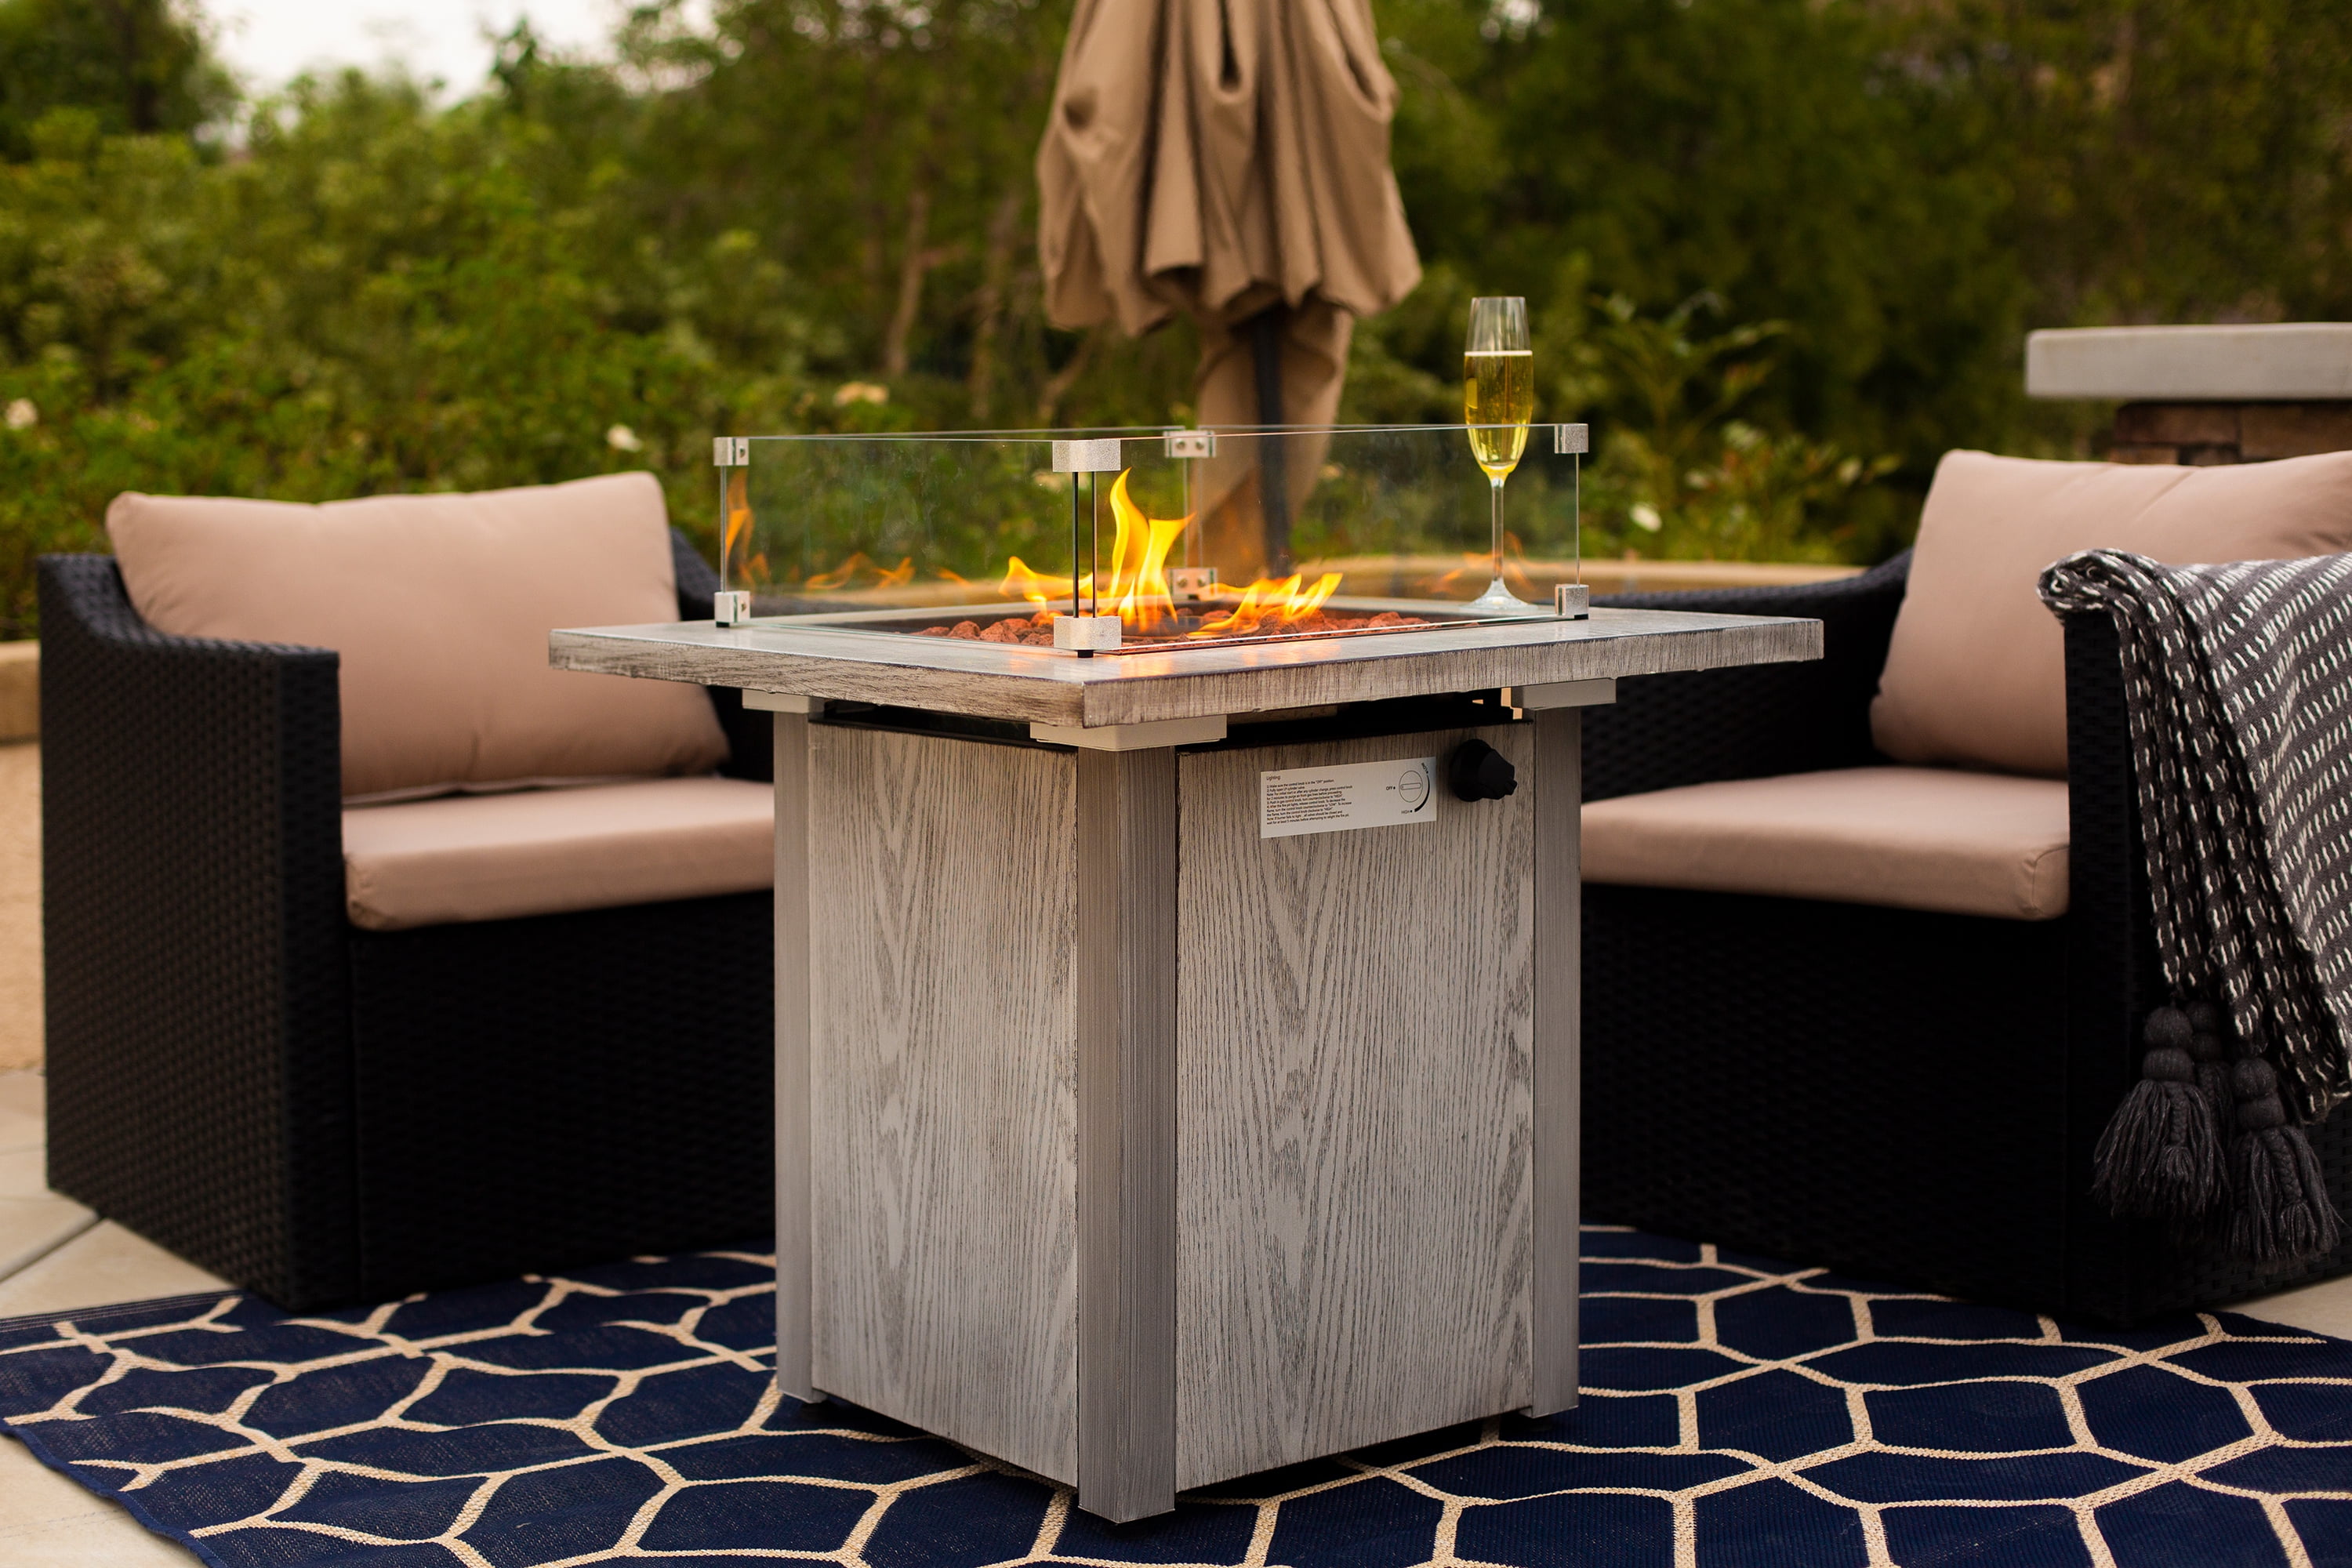 Barton 48,000 BTU Outdoor Propane Gas Fire Pit Table Gas Firepit with